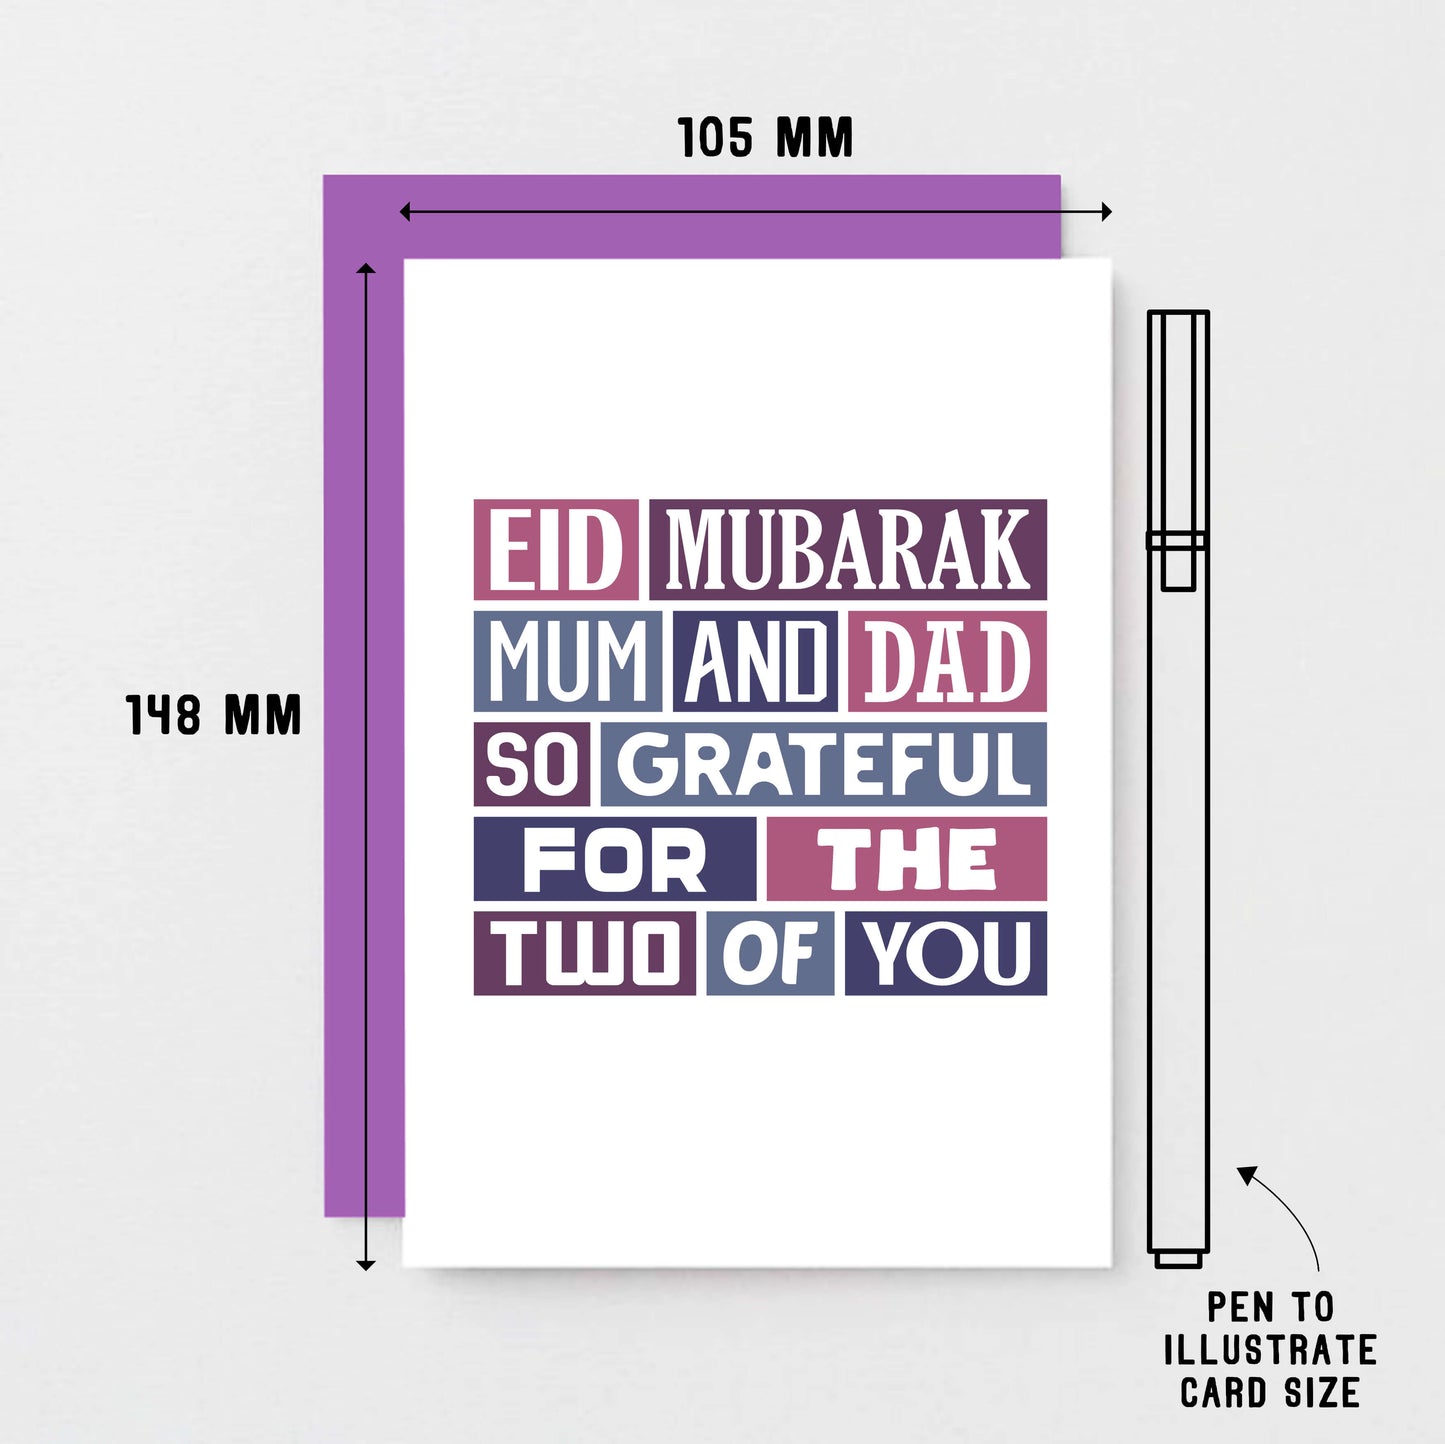 Eid Mubarak Card by SixElevenCreations. Reads Eid Mubarak Mum and Dad. So grateful for the two of you. Product Code SEH0013A6